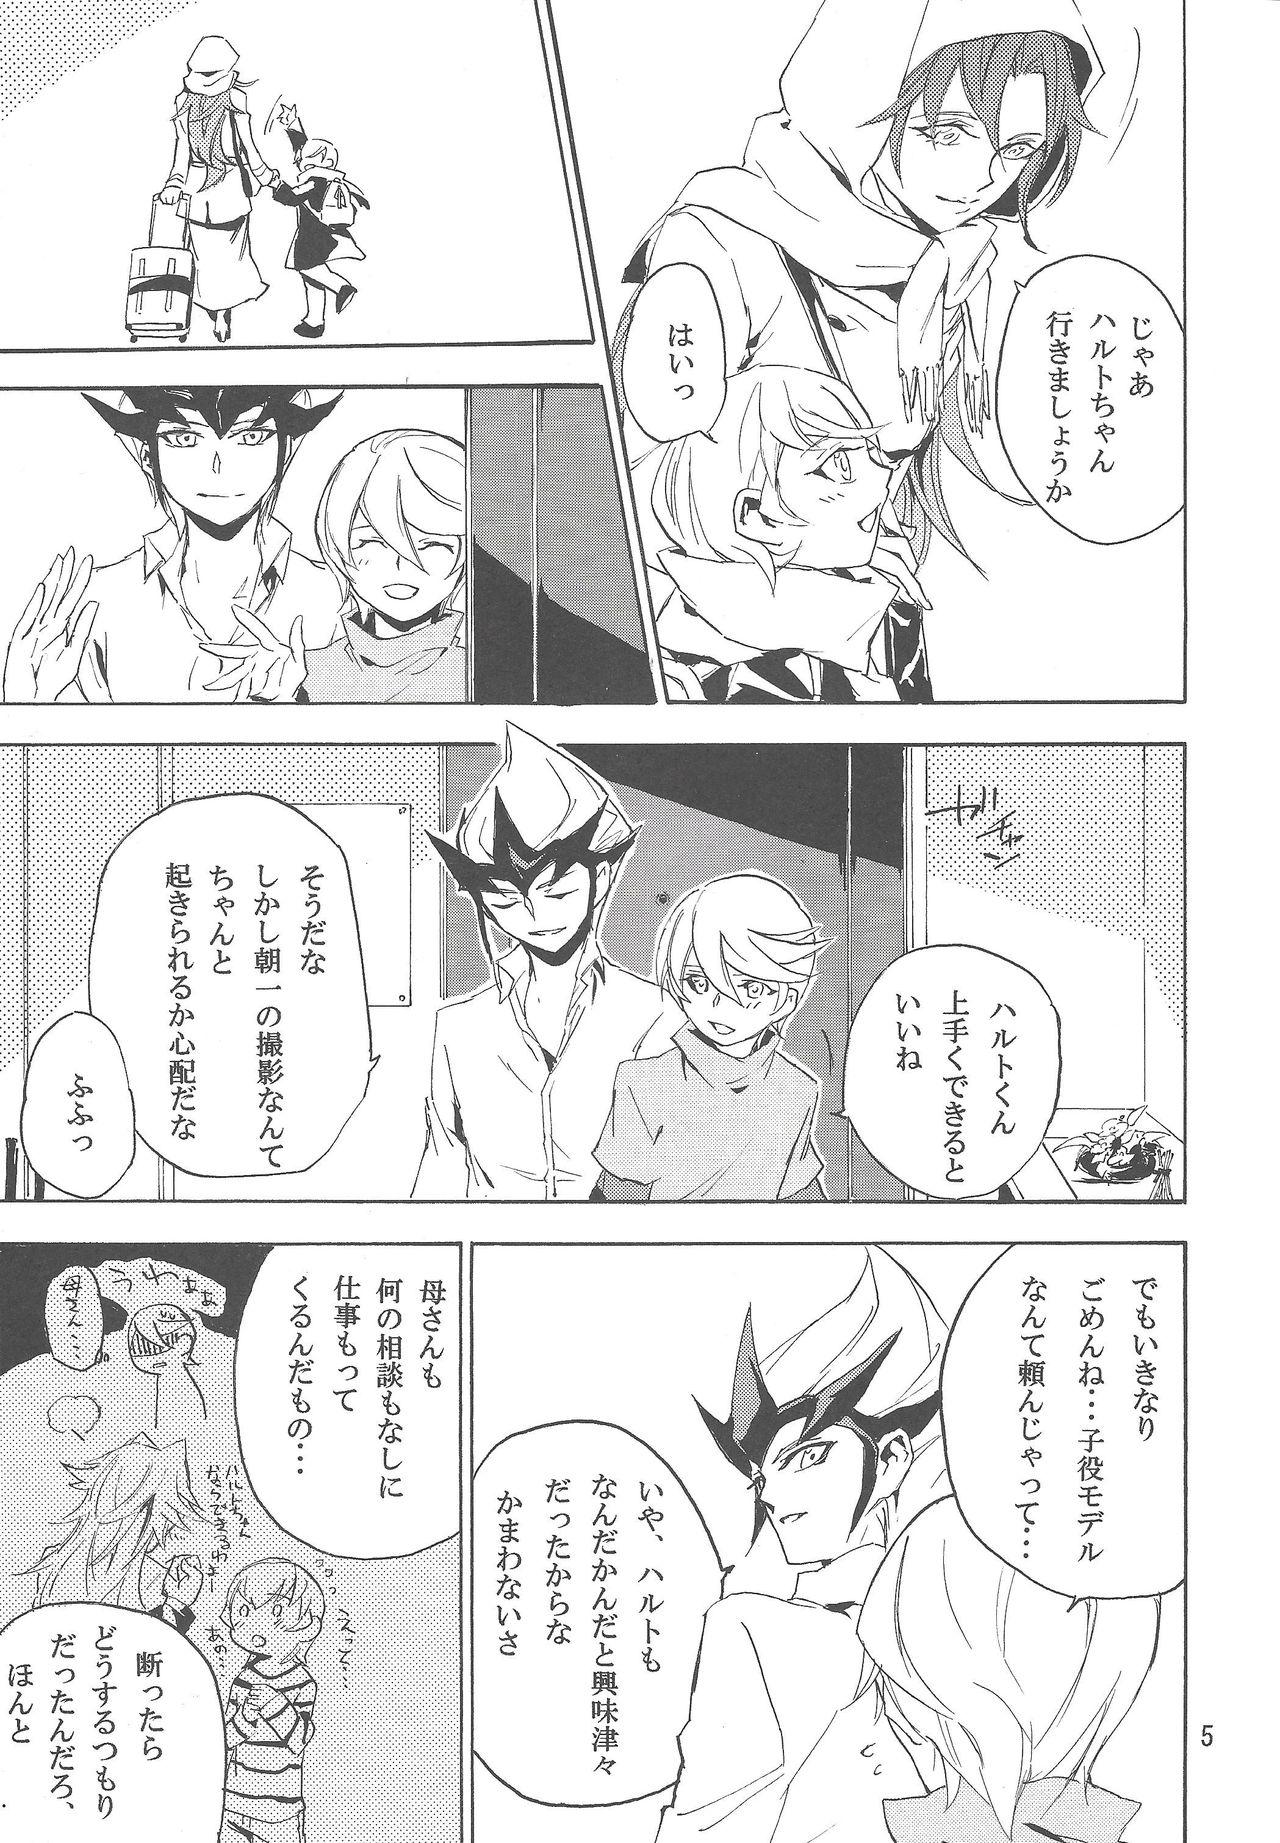 Hot Blow Jobs Sugarless Candy - Yu gi oh zexal Shaved - Page 4